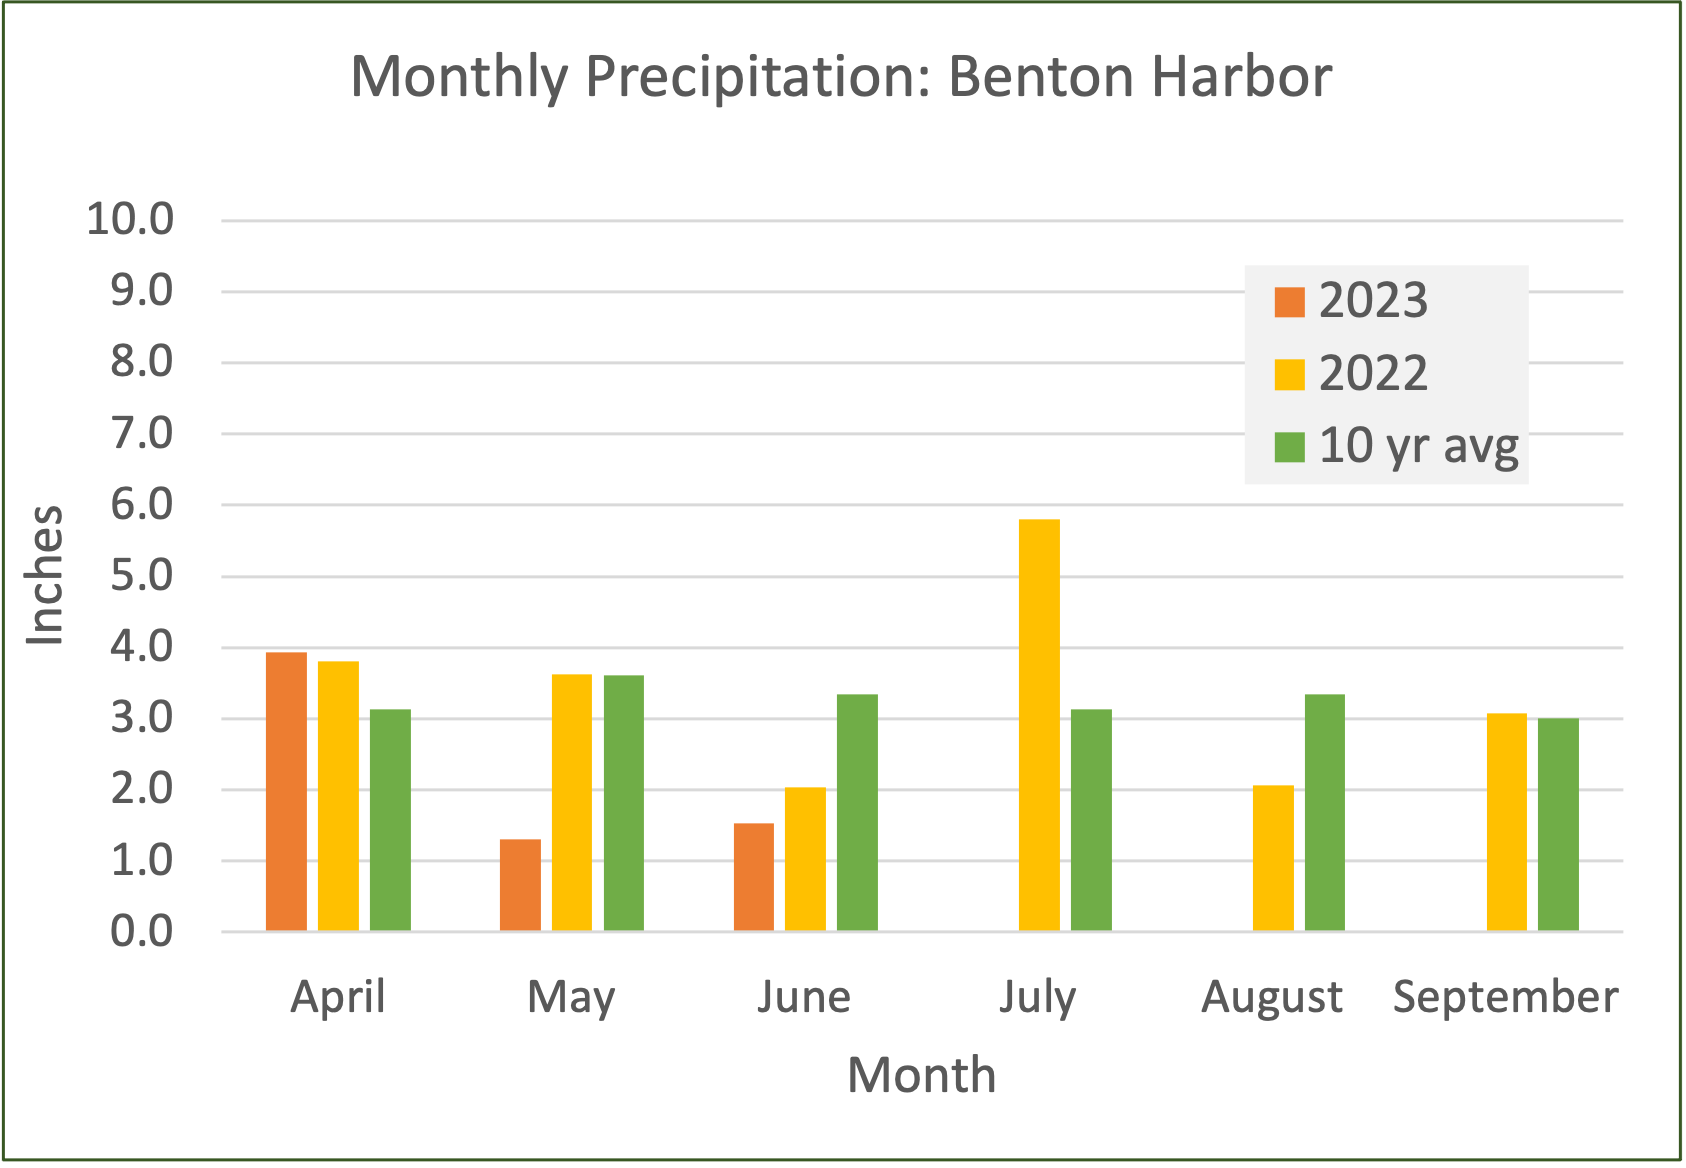 Precipitation graph by month showing April, May, June 2023 compared to 2022 and long term average